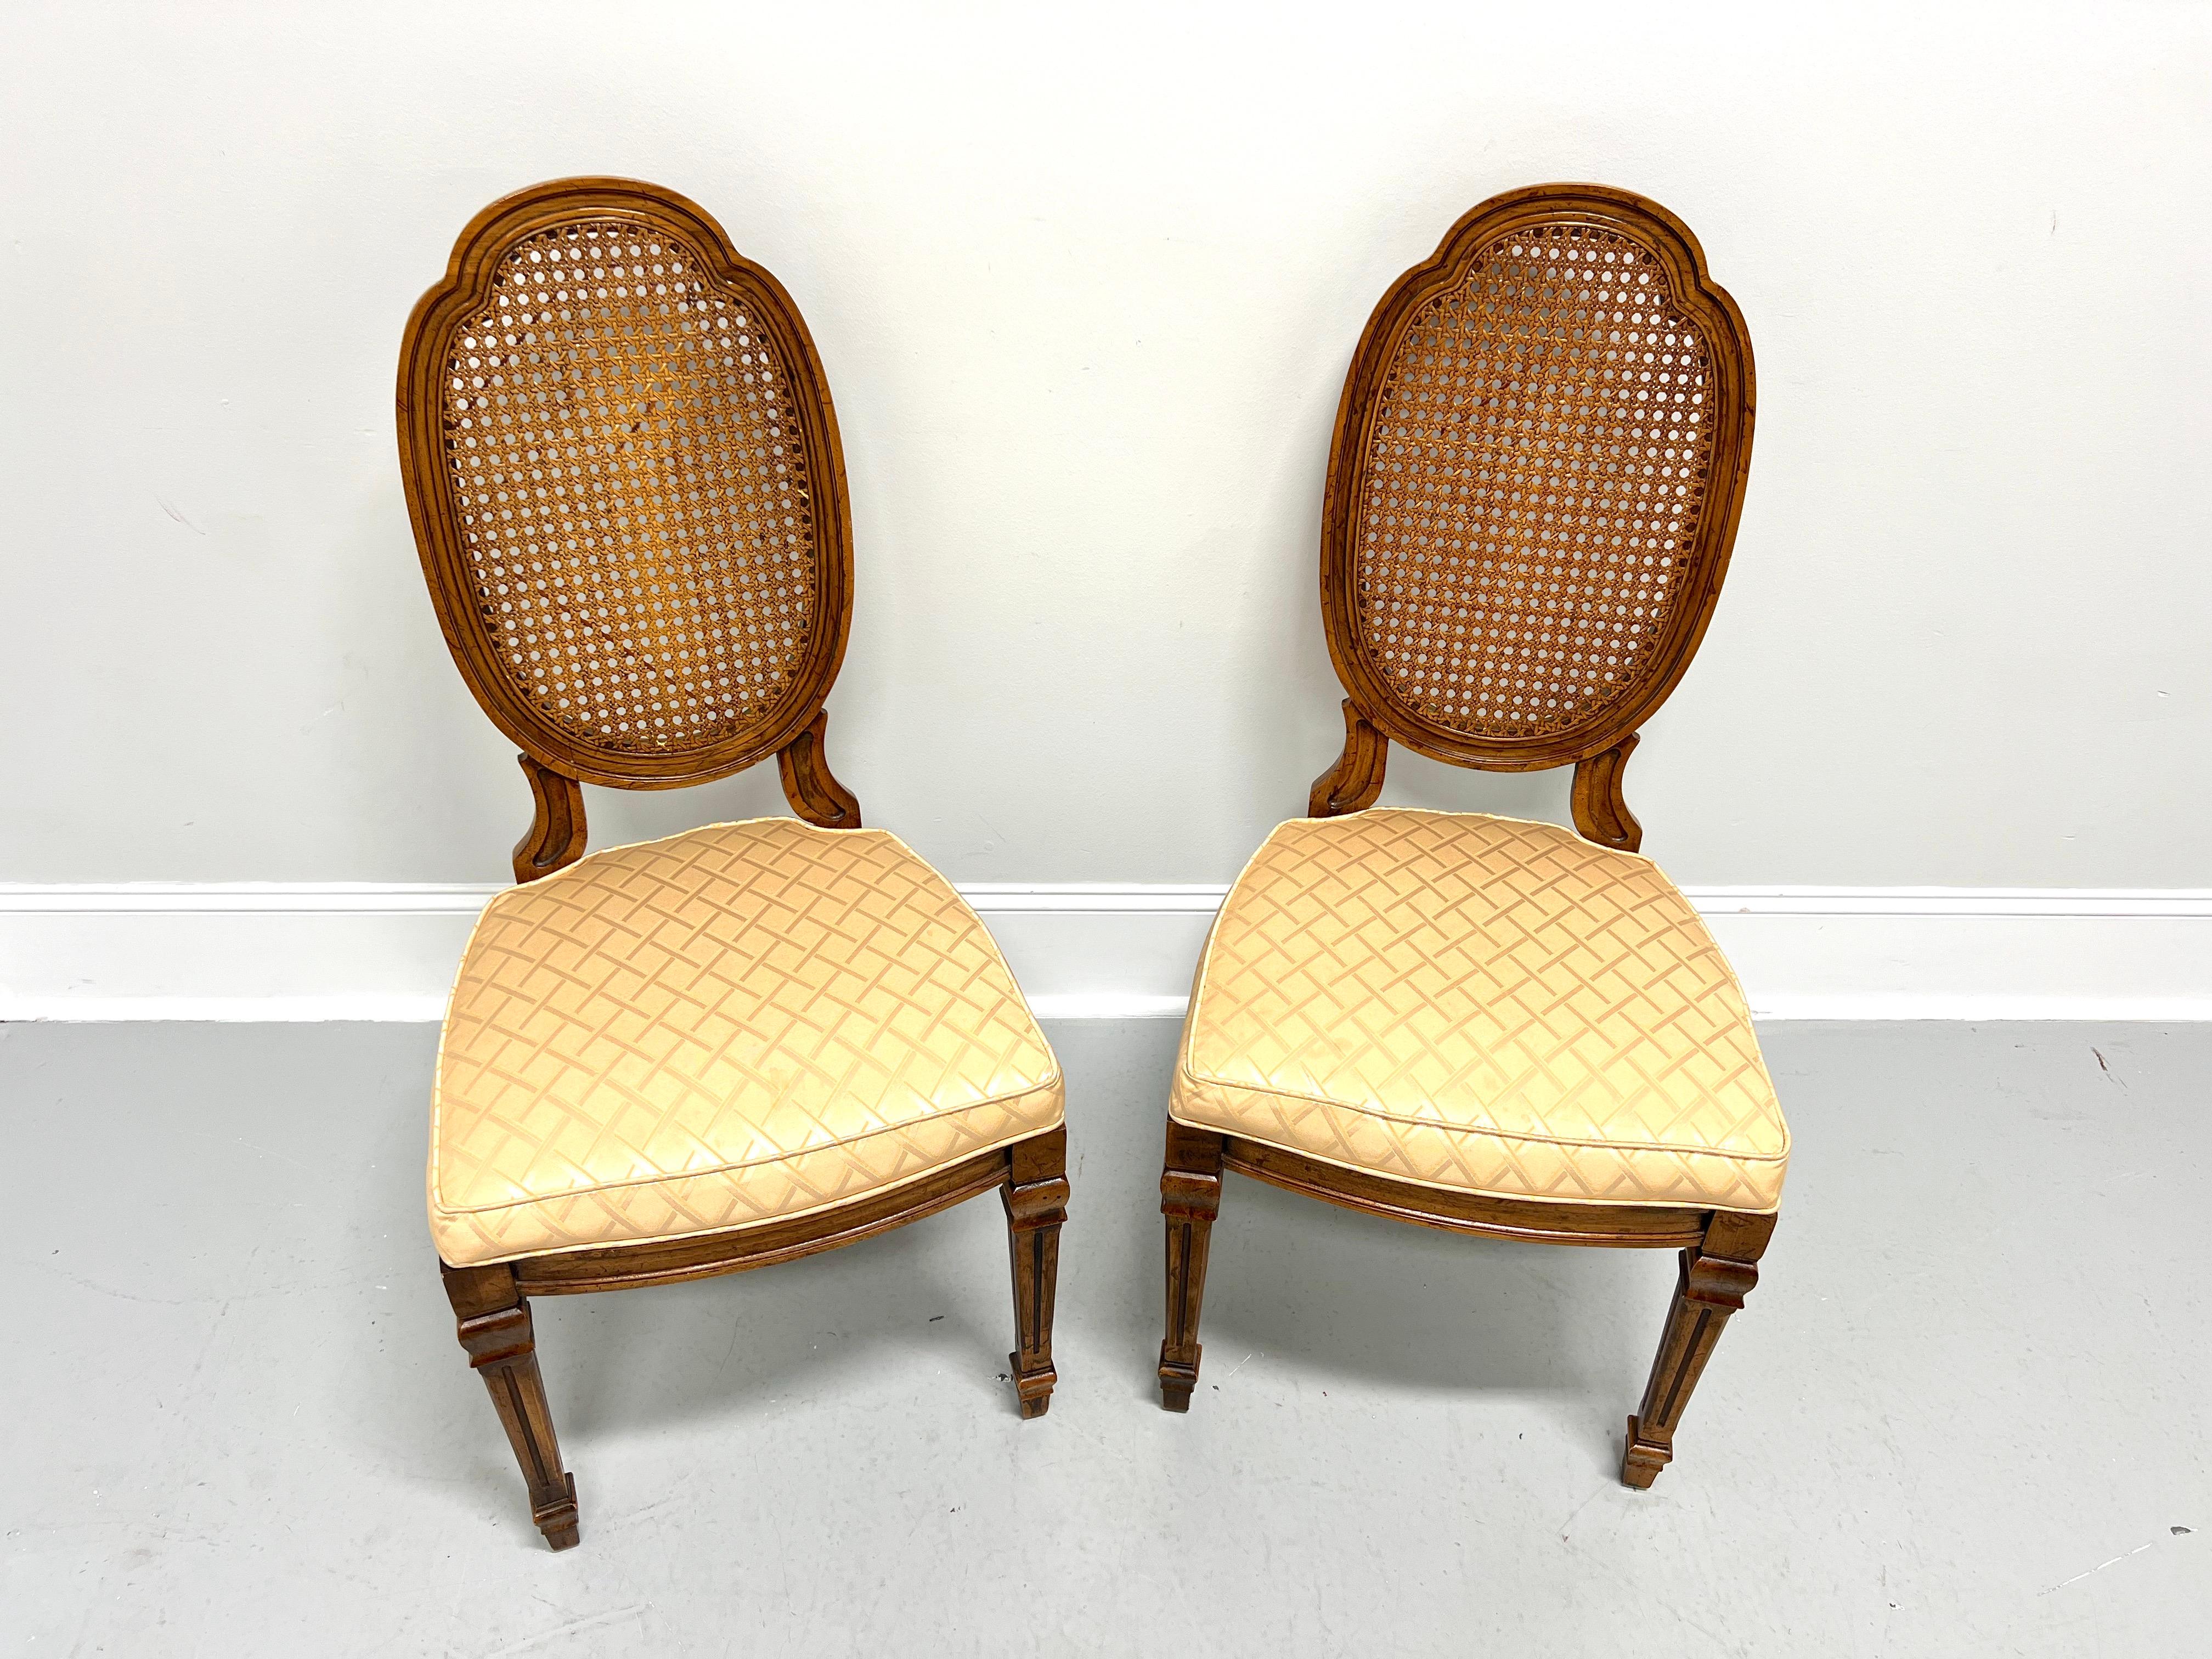 A pair of French Provincial Louis XVI style dining side chairs by Drexel Heritage. Walnut with a slightly distressed finish, carved oval shield-like caned backs, gold color diamond pattern fabric upholstered seats, carved apron, tapered fluted